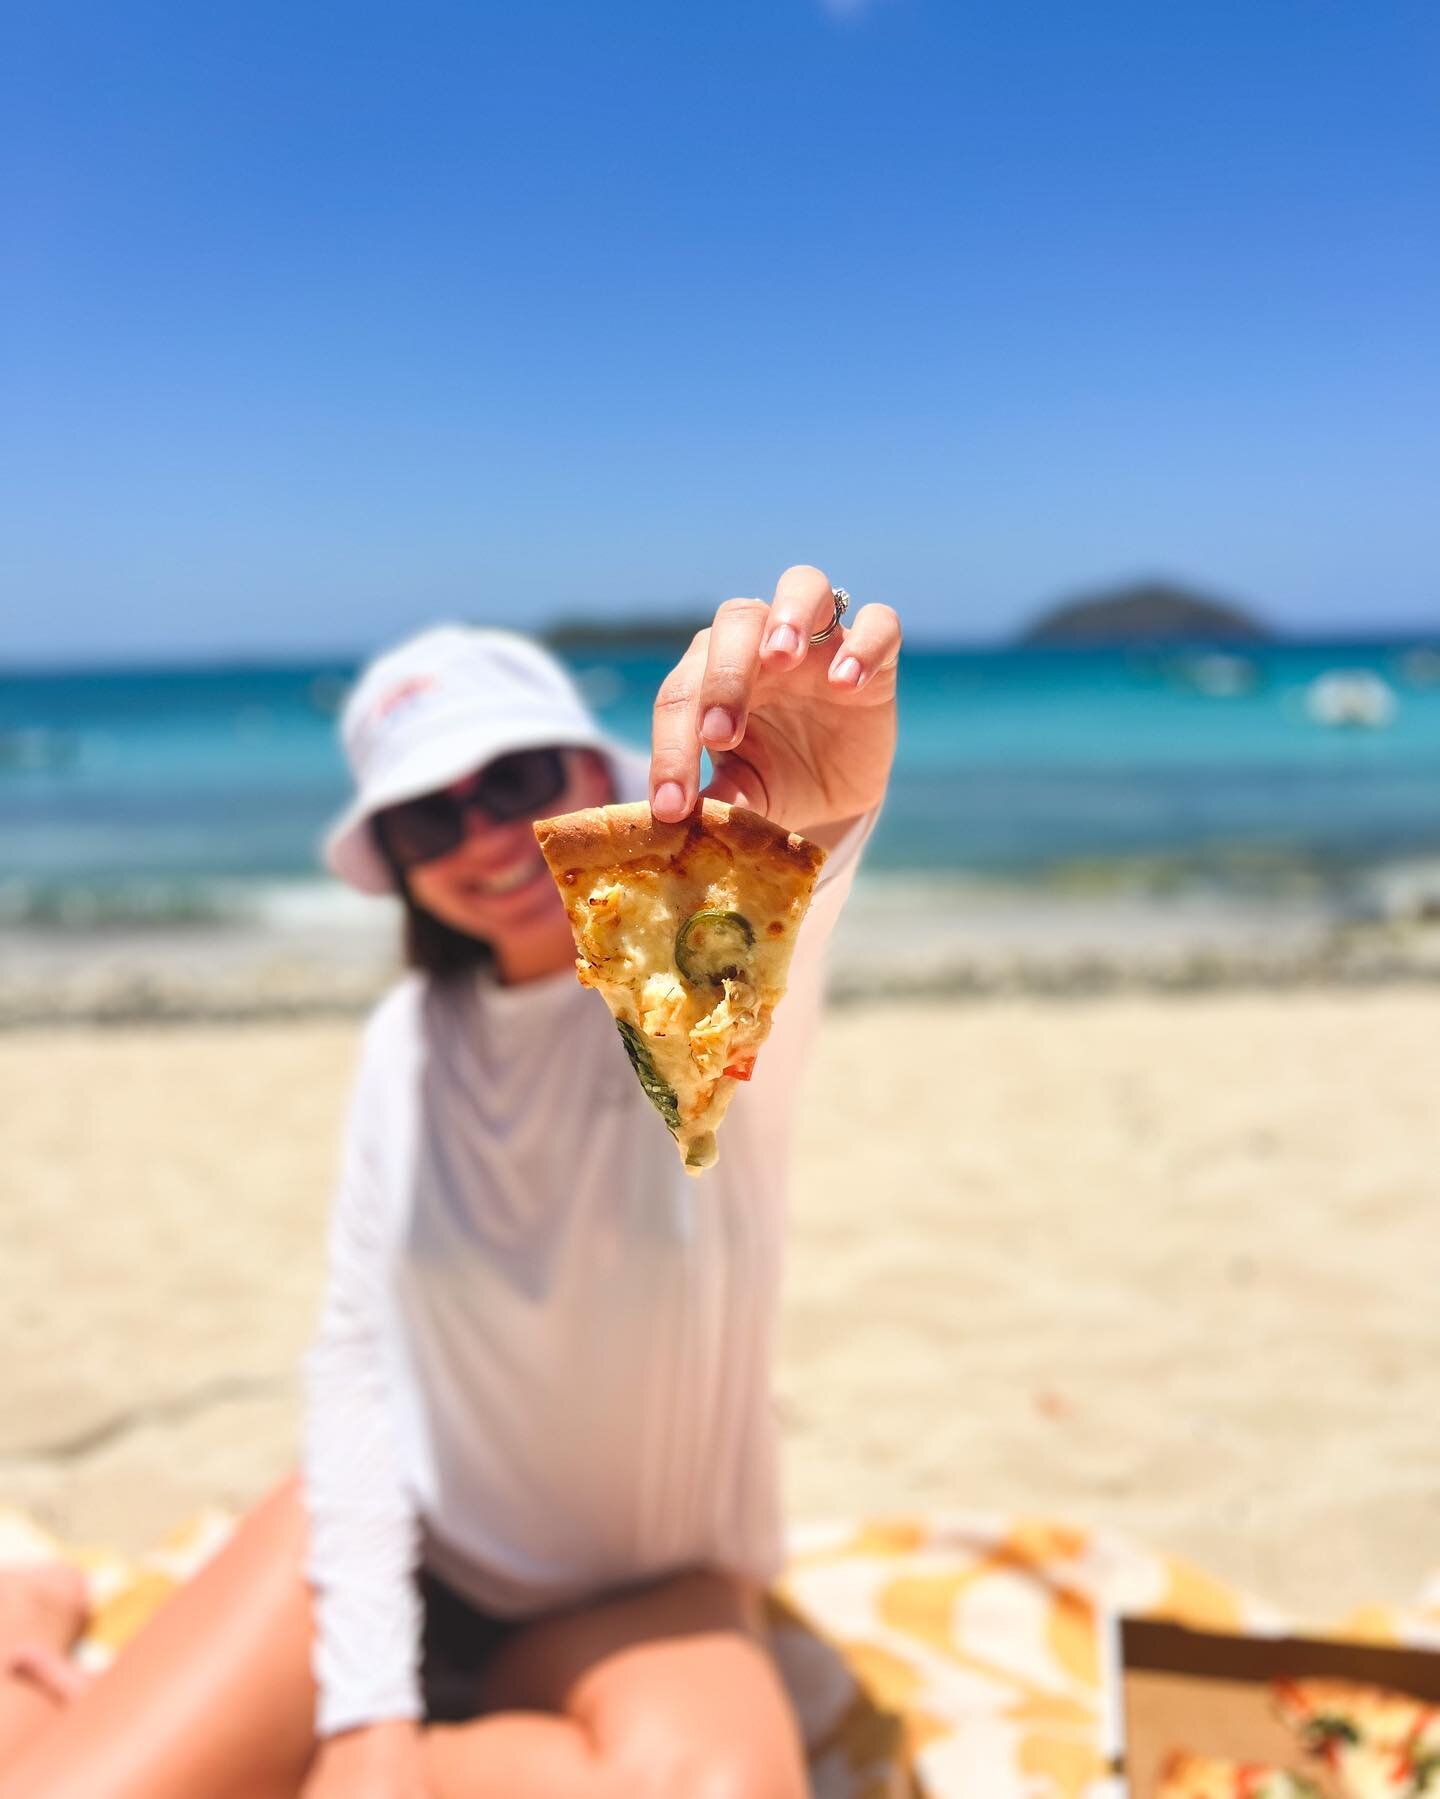 Enjoying our slice of paradise 🍕☀️🌴 &rarr; Today&rsquo;s pizza is topped with locally caught l o b s t e r + veggies!

 See ya @ The Shack // We&rsquo;re open &lsquo;til 8:00pm Tuesday thru Sunday!